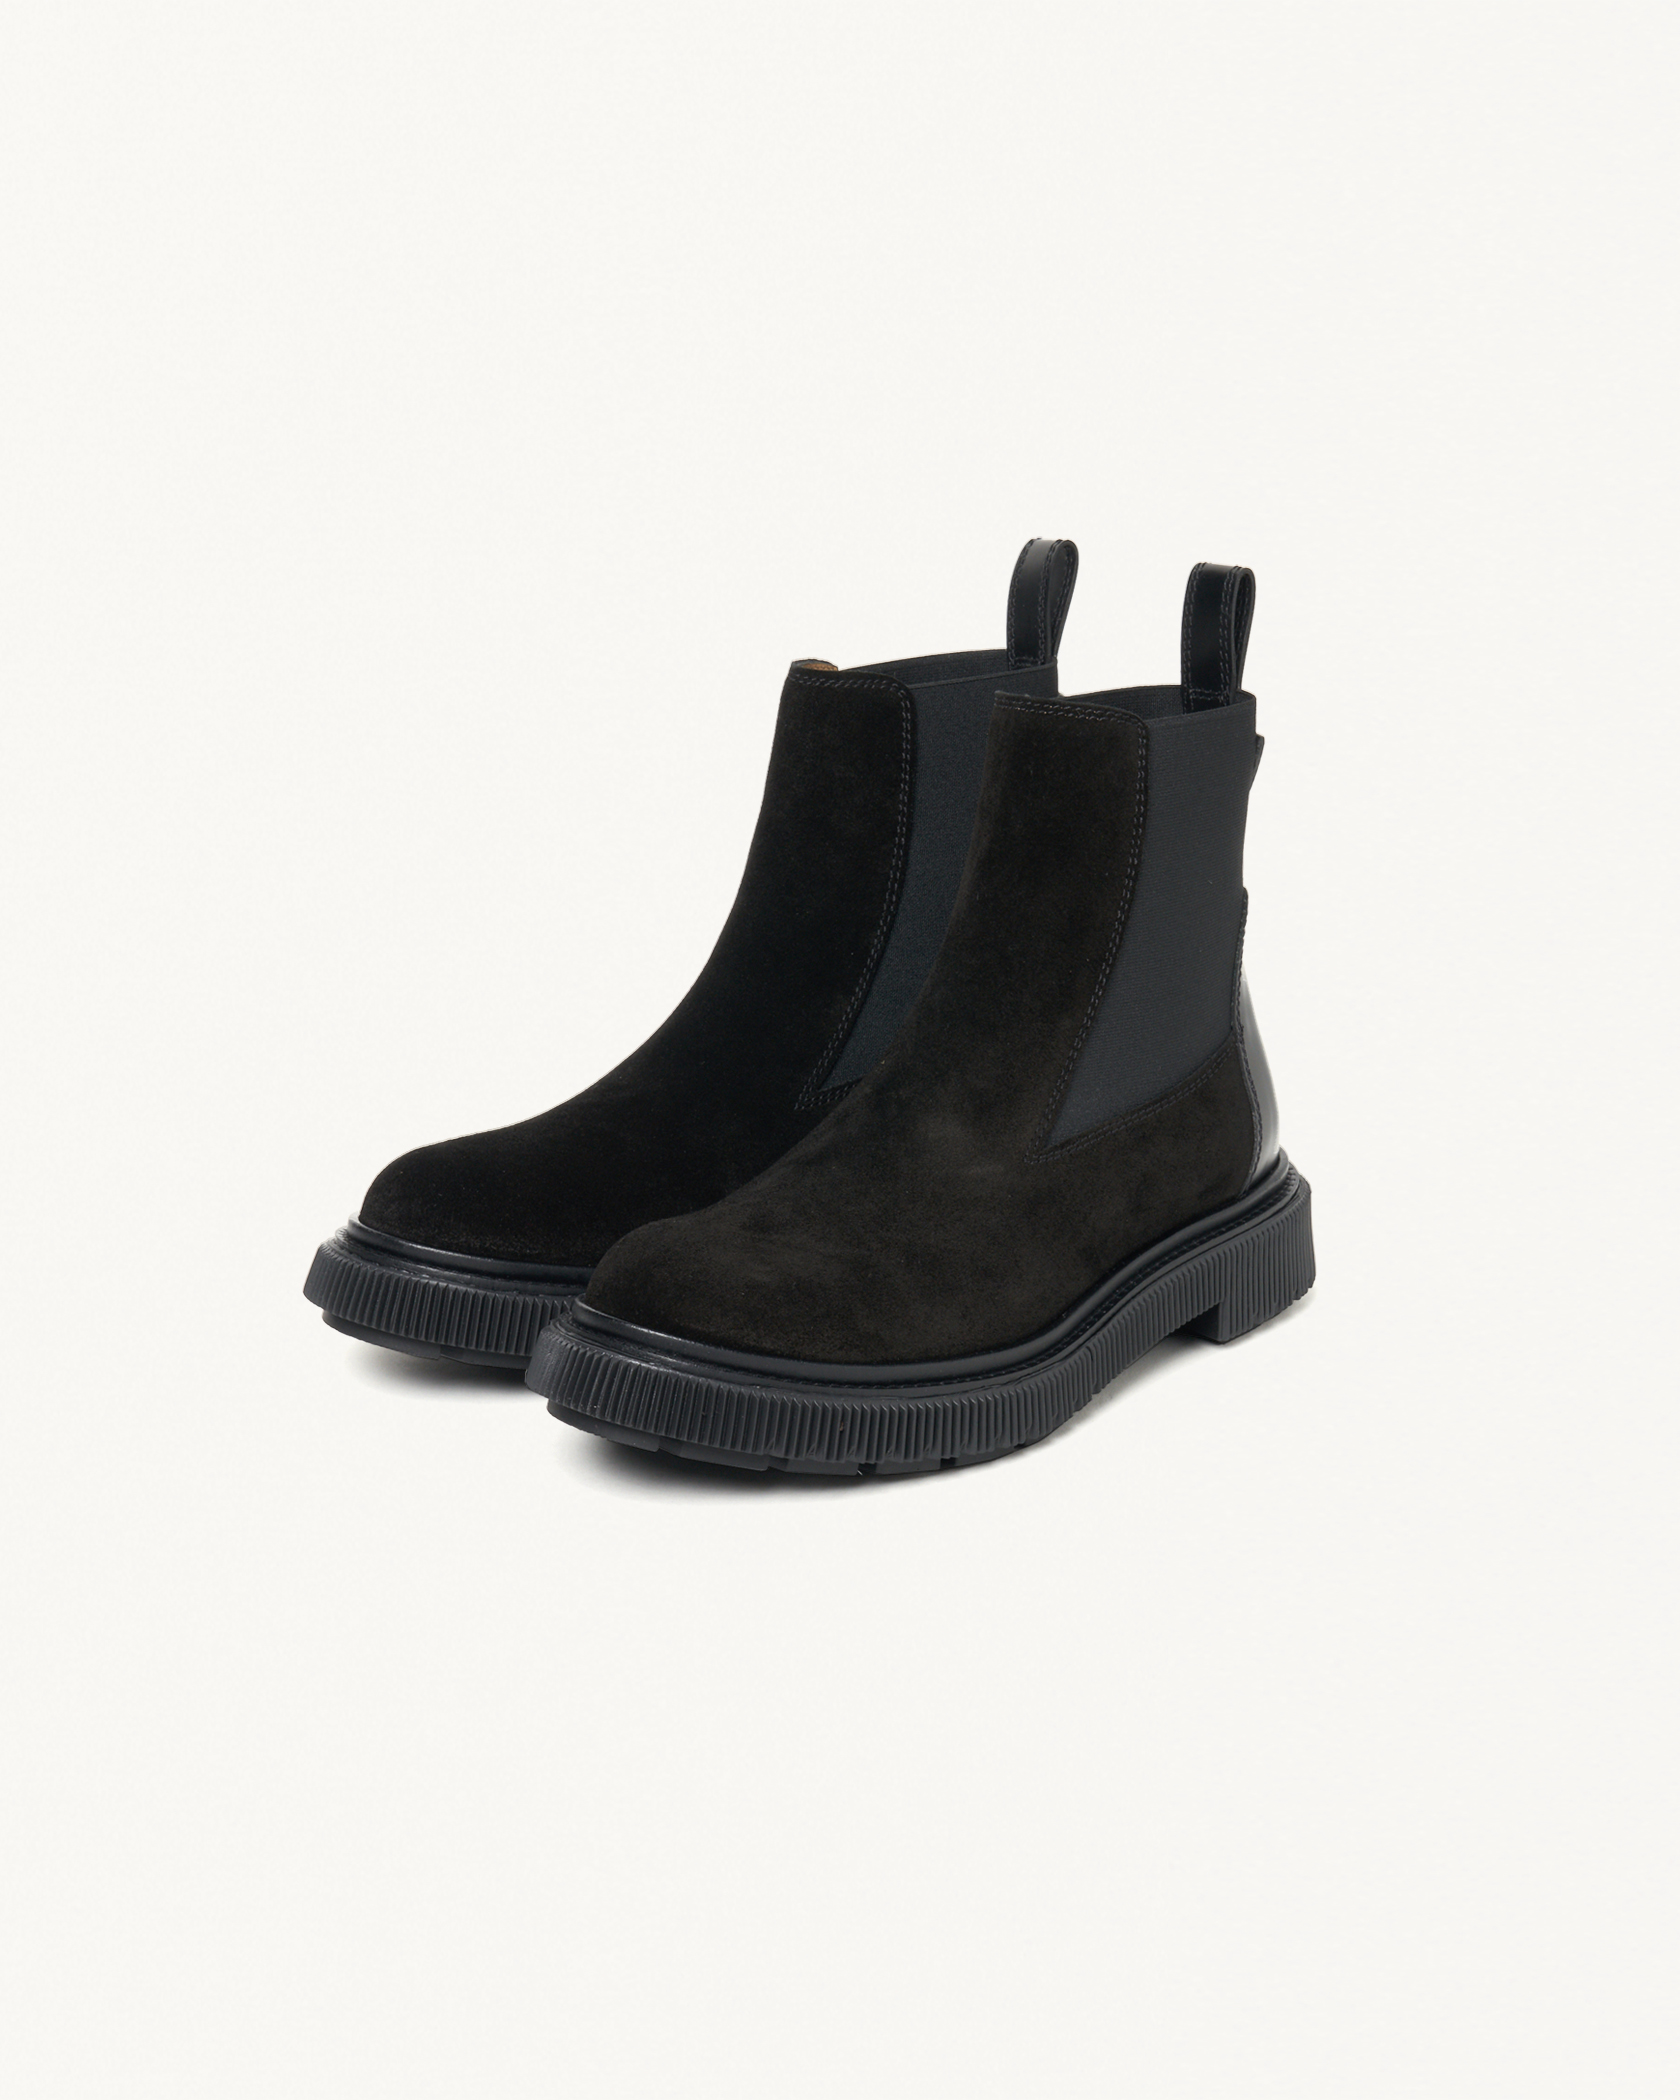 ADIEU×FORSOMEONE CHELSEA BOOTS | FORSOMEONE(フォー